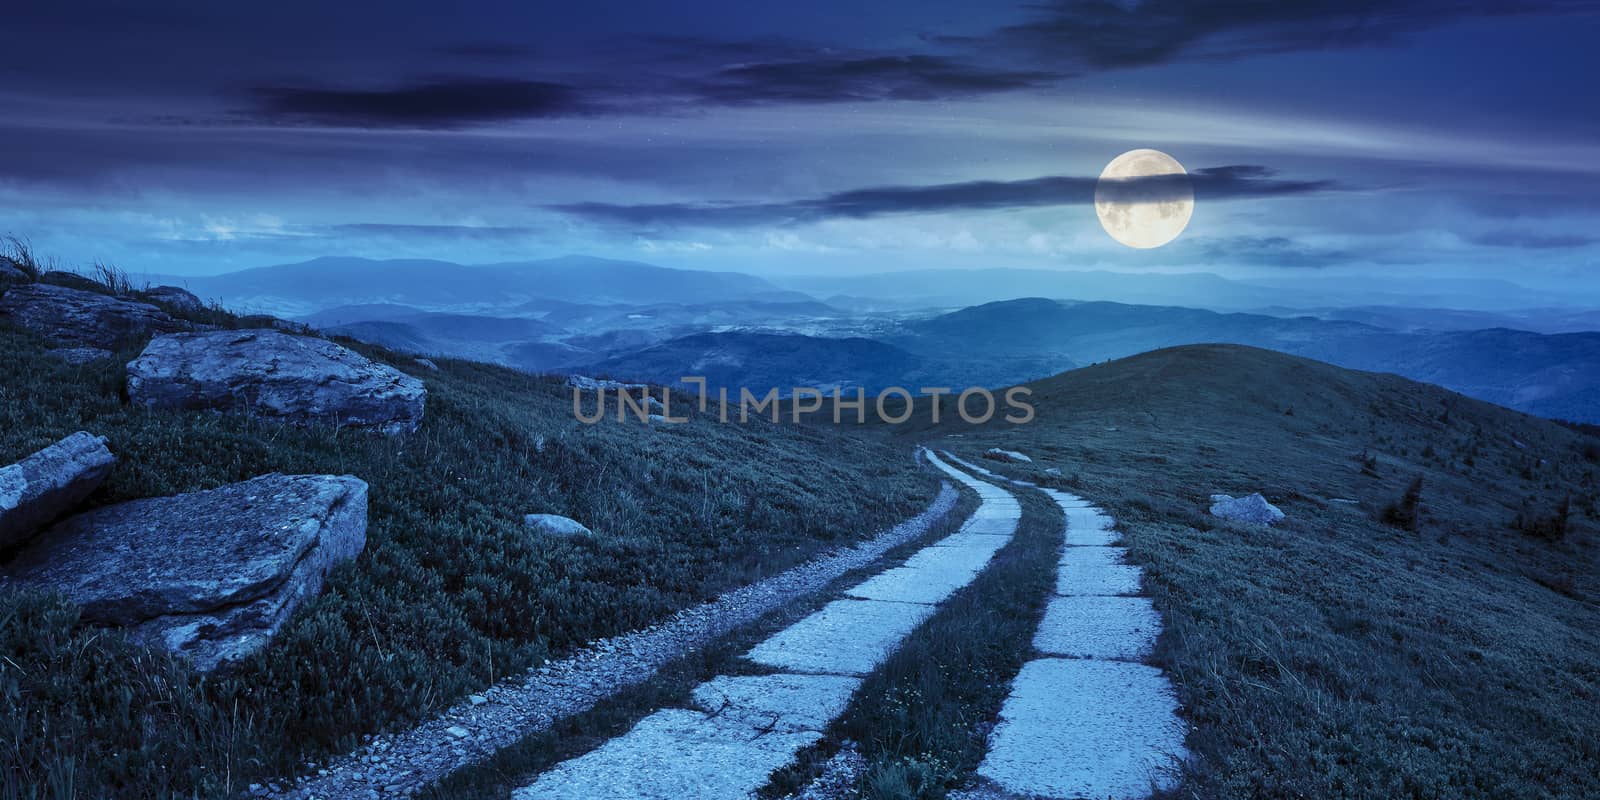 composite panorama Landscape with road on a hillside with huge stones and conifer trees  near mountain peak at night in full moon light